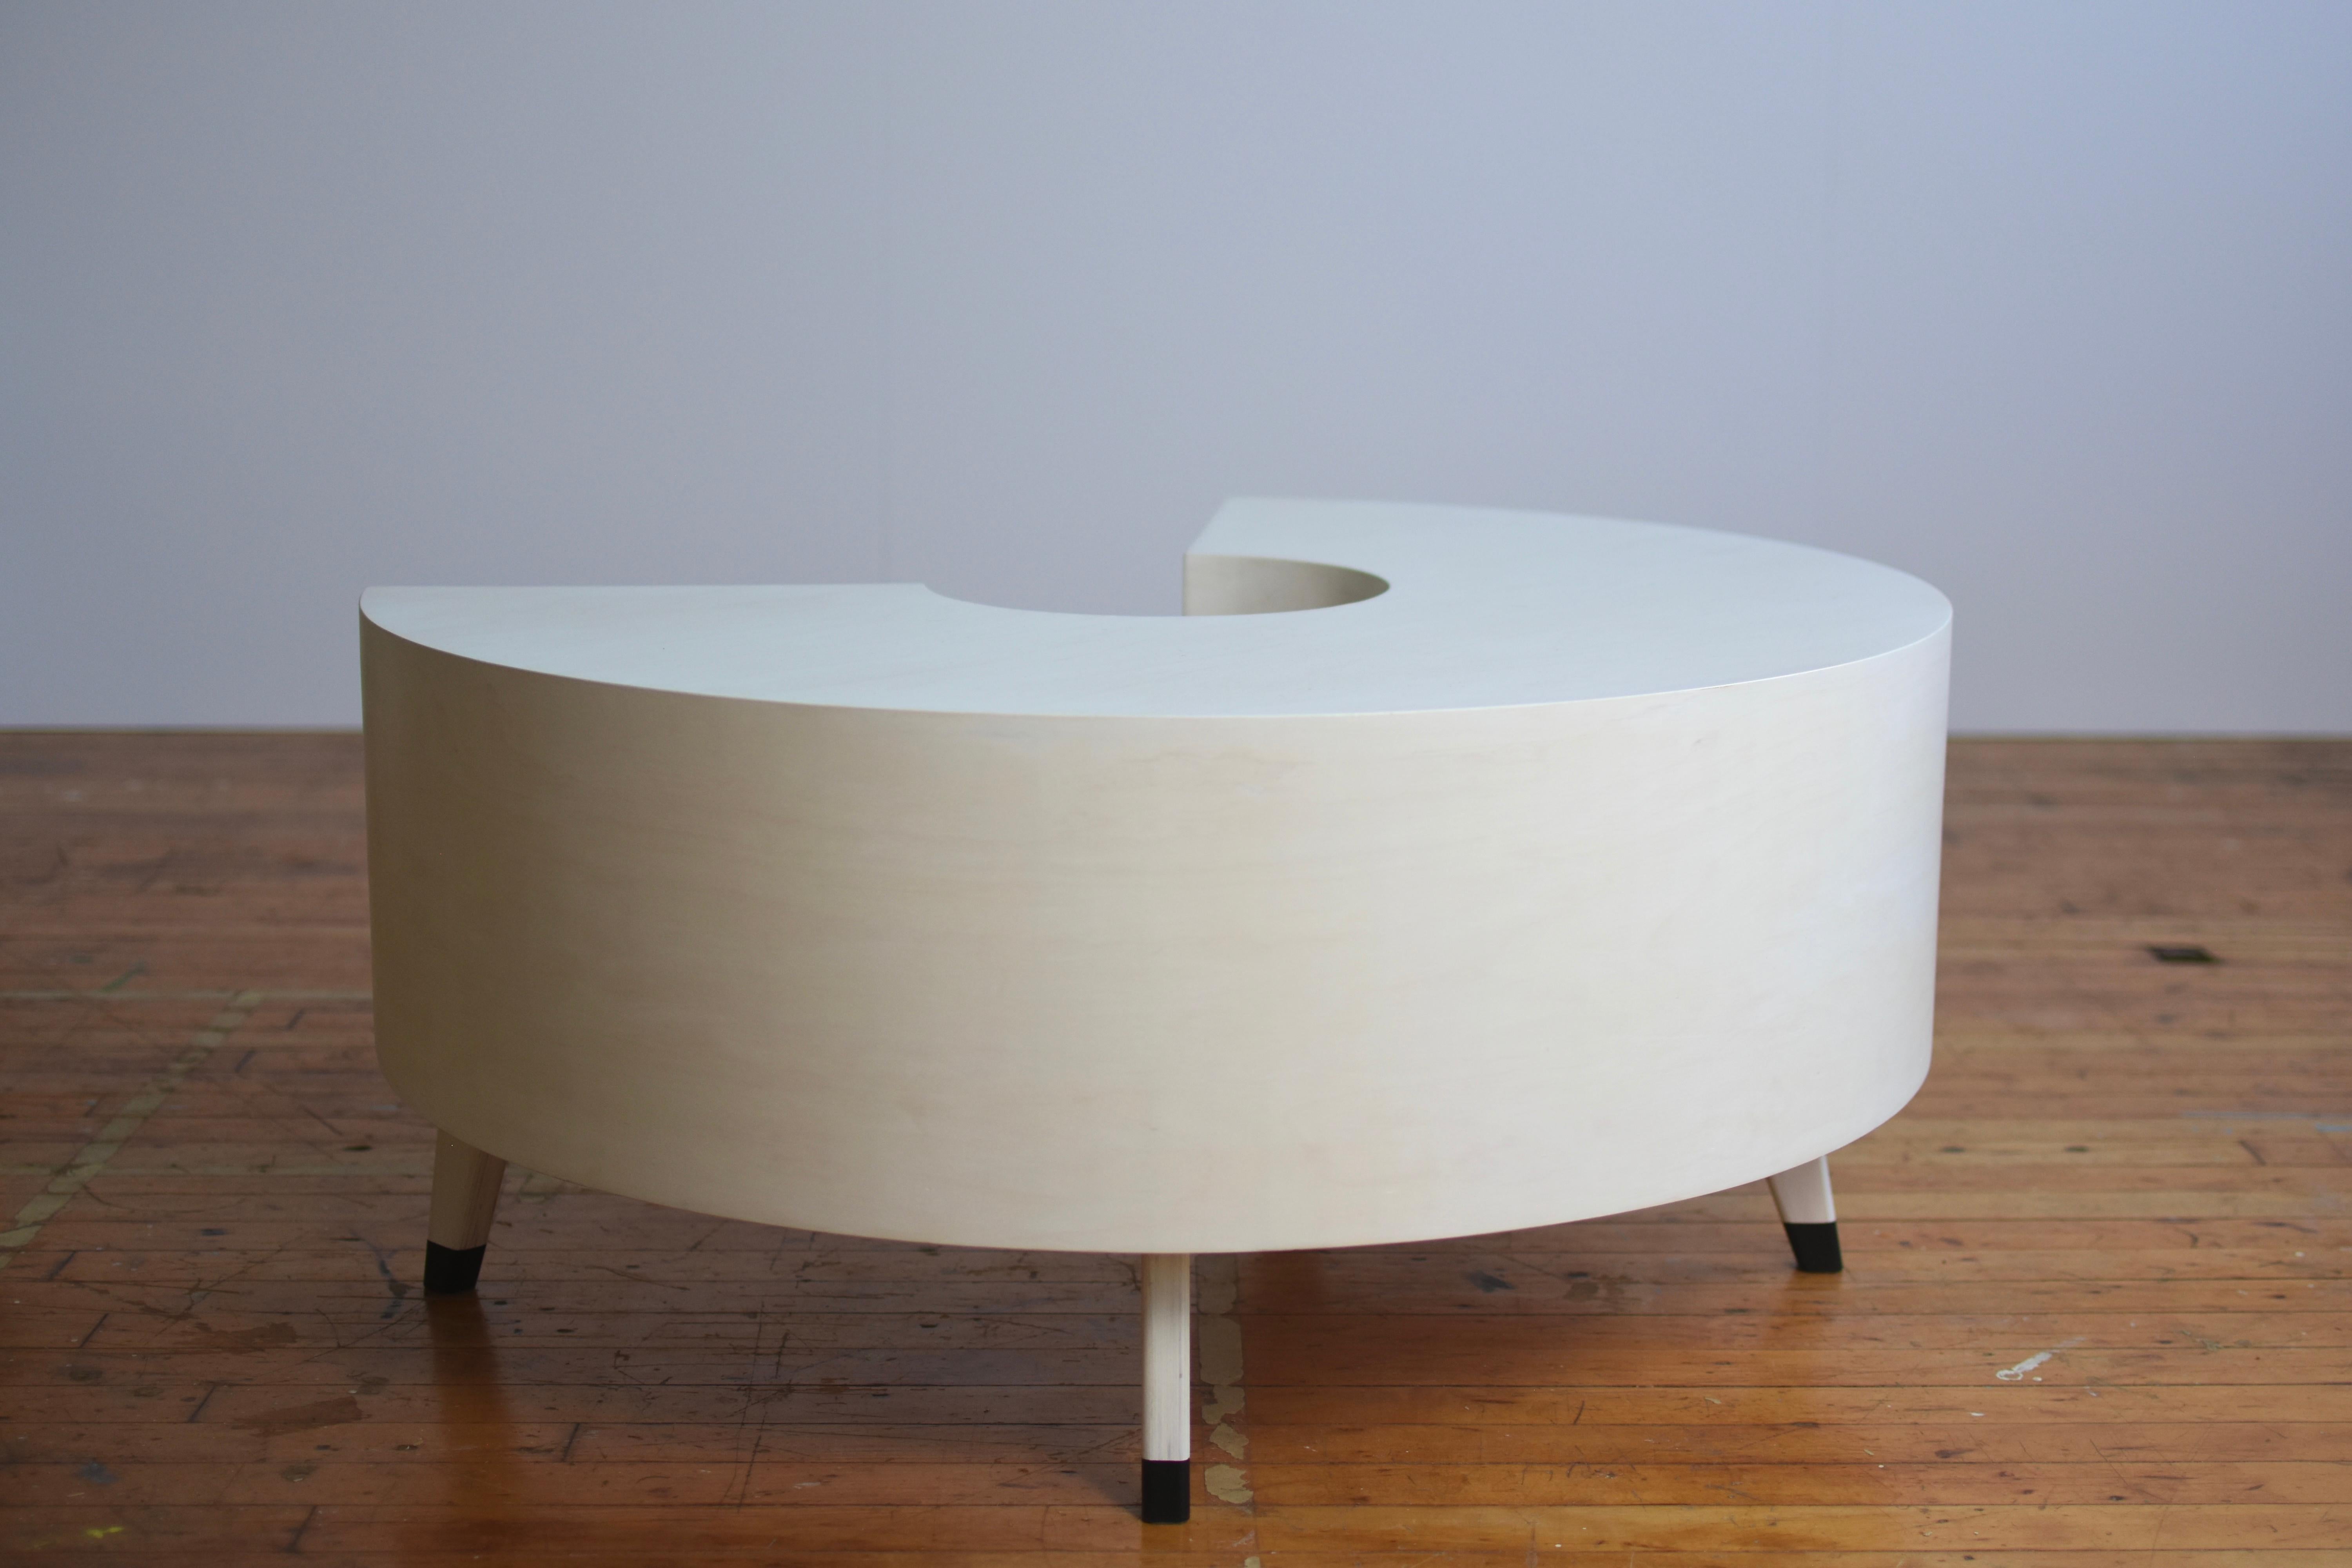 Plywood Coco Table, Round Circular Coffee Table with Hidden Drawer for storage  For Sale